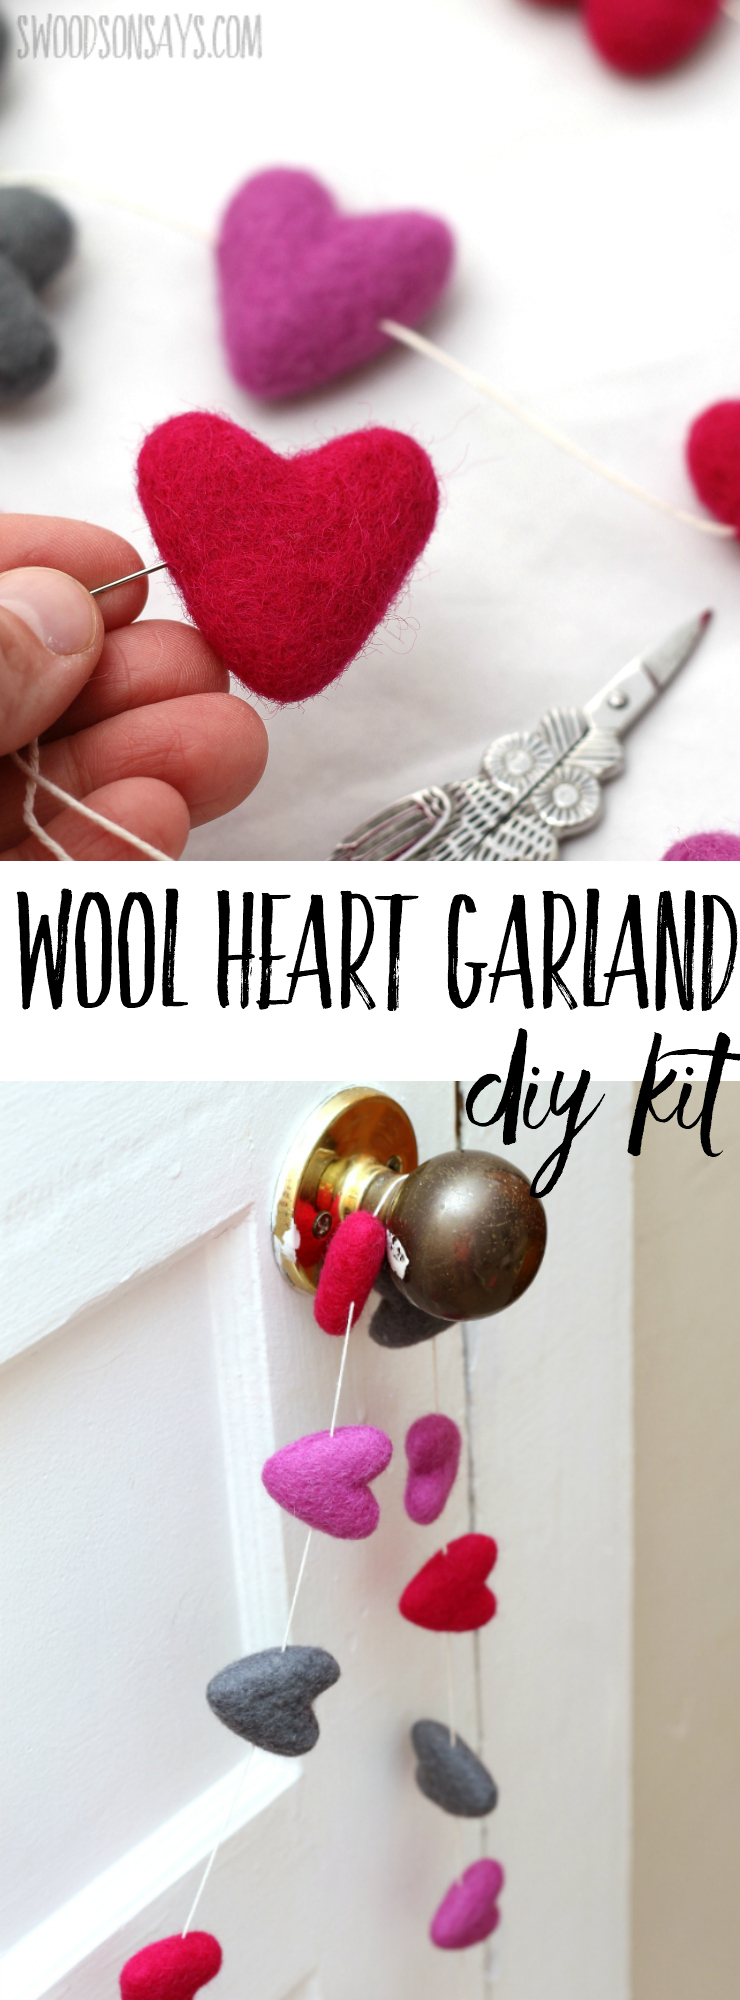 Simple Valentine's Day decor ideas can be beautiful, too! Check out this needle felted wool heart garland kit; it takes less than 10 minutes to make and you can choose your colors! #valentinesday #diyvalentine #valentinecraft